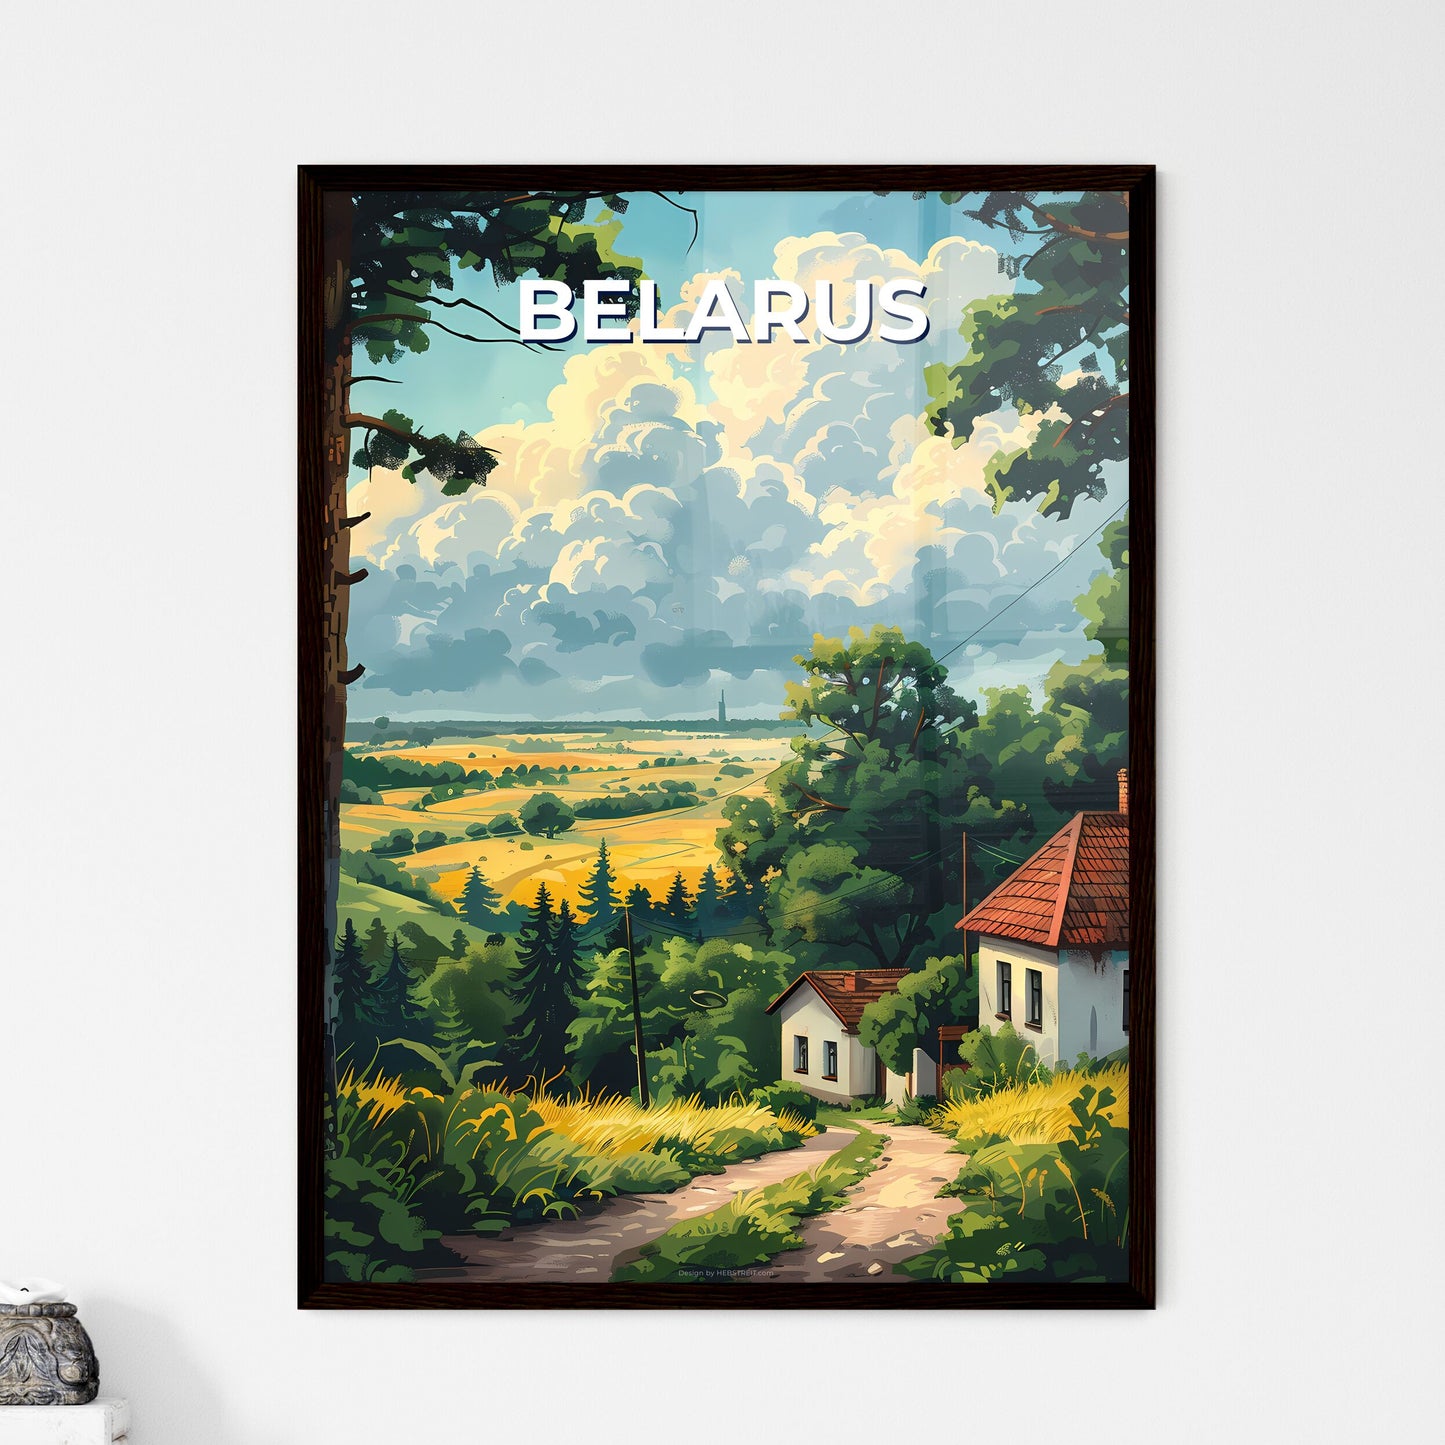 House in Forest, Belarus, Europe, Painting, Art, Vibrant, Canvas, Nature, Landscape